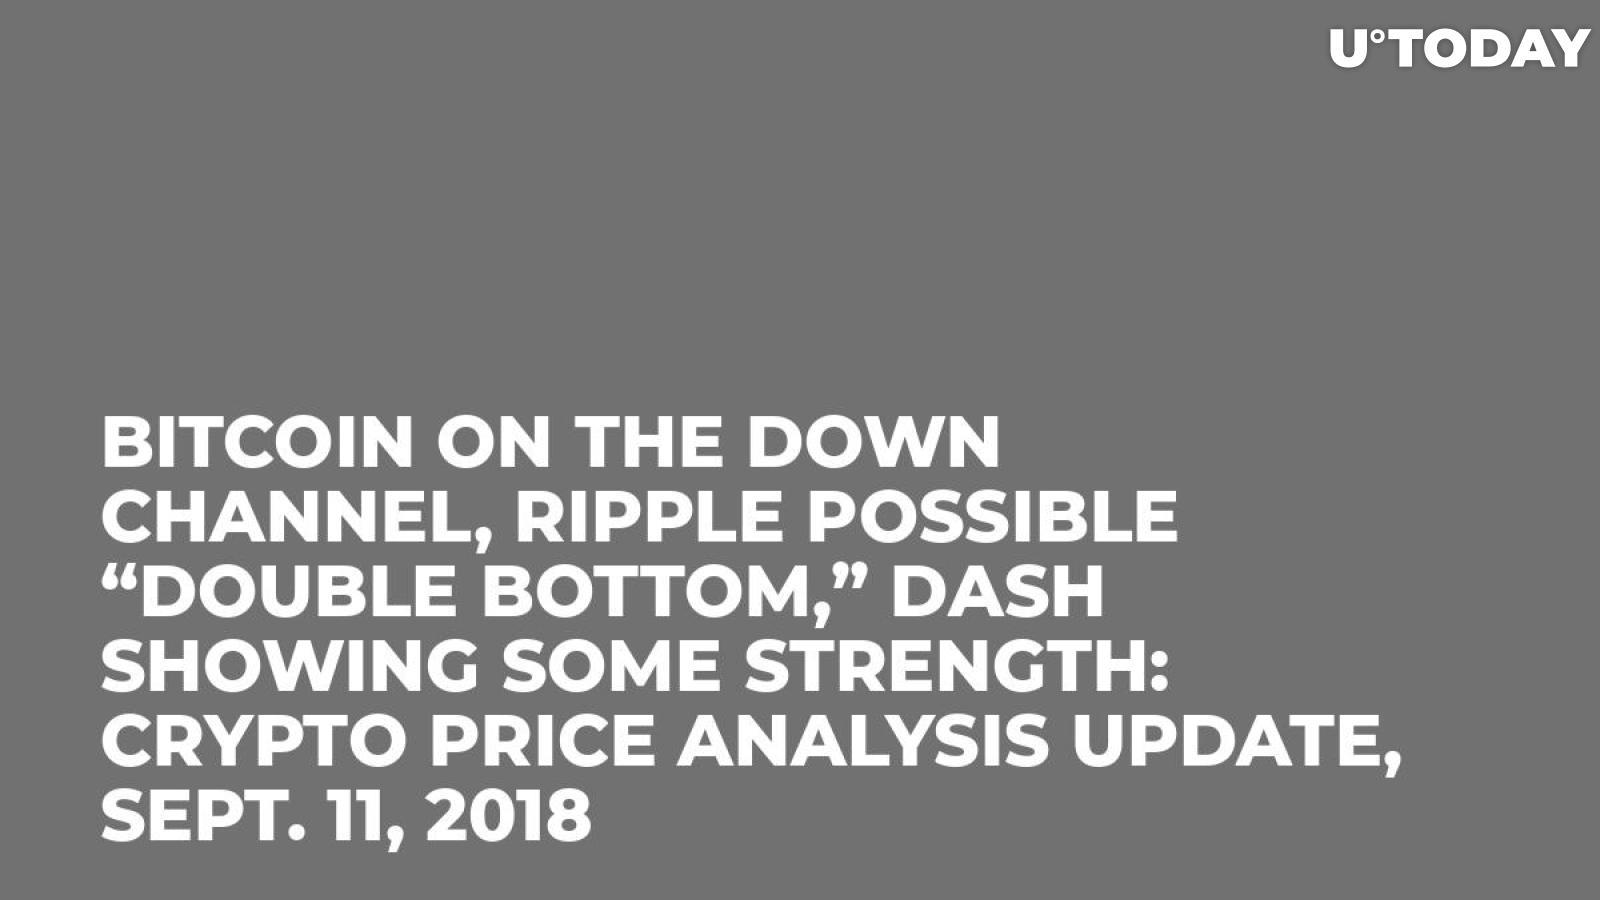 Bitcoin on the Down Channel, Ripple Possible “Double Bottom,” DASH Showing Some Strength: Crypto Price Analysis Update, Sept. 11, 2018